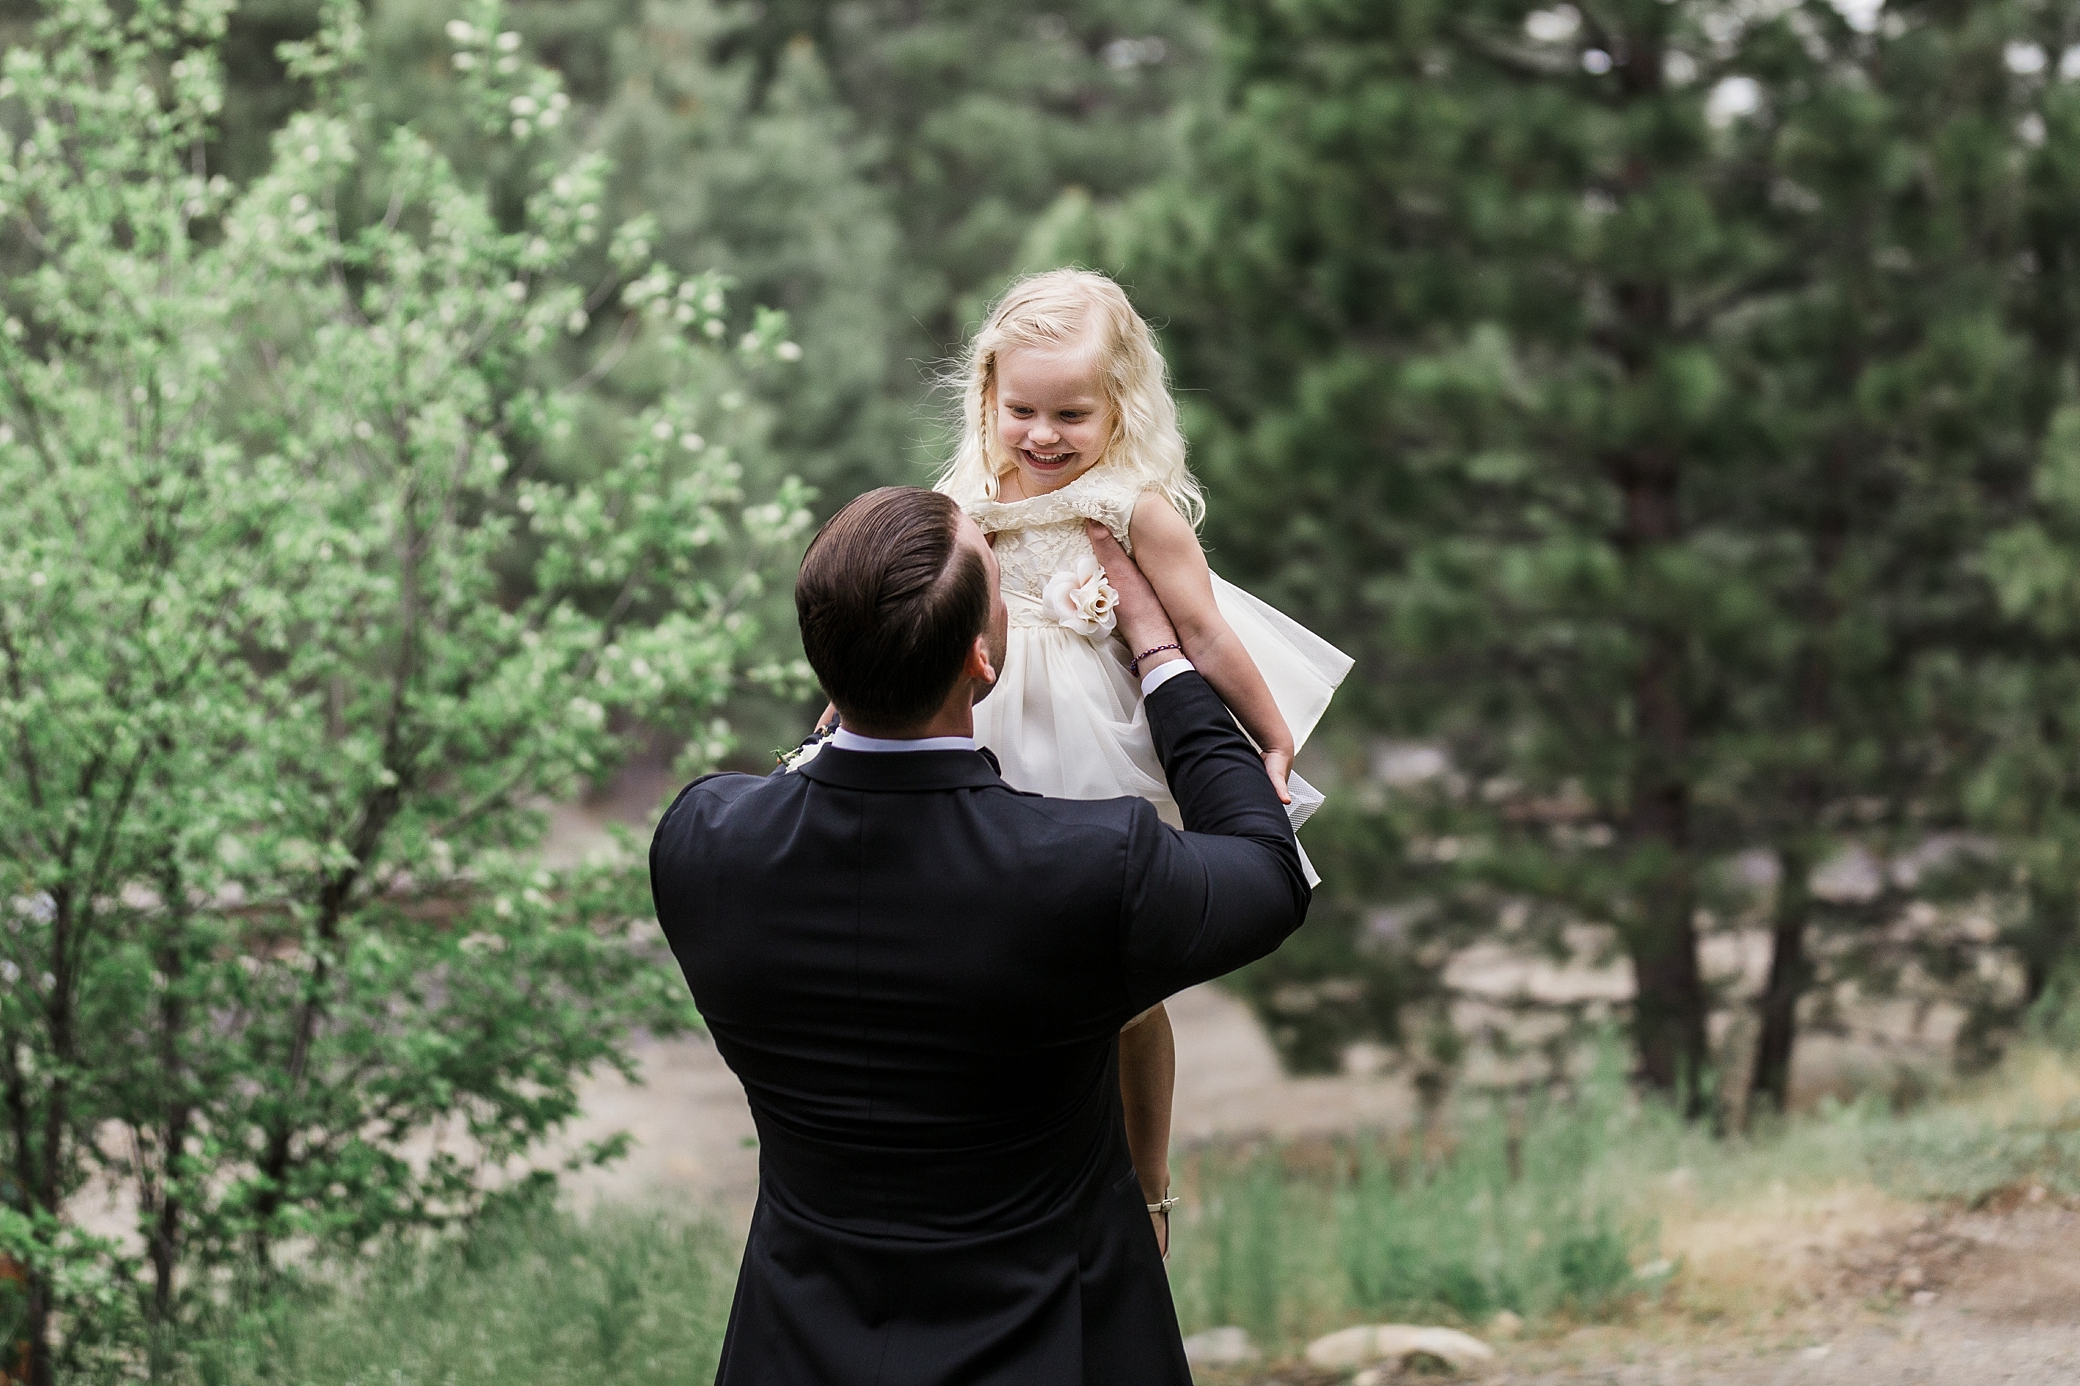 Groom does a first look with the flower girl | Megan Montalvo Photography 